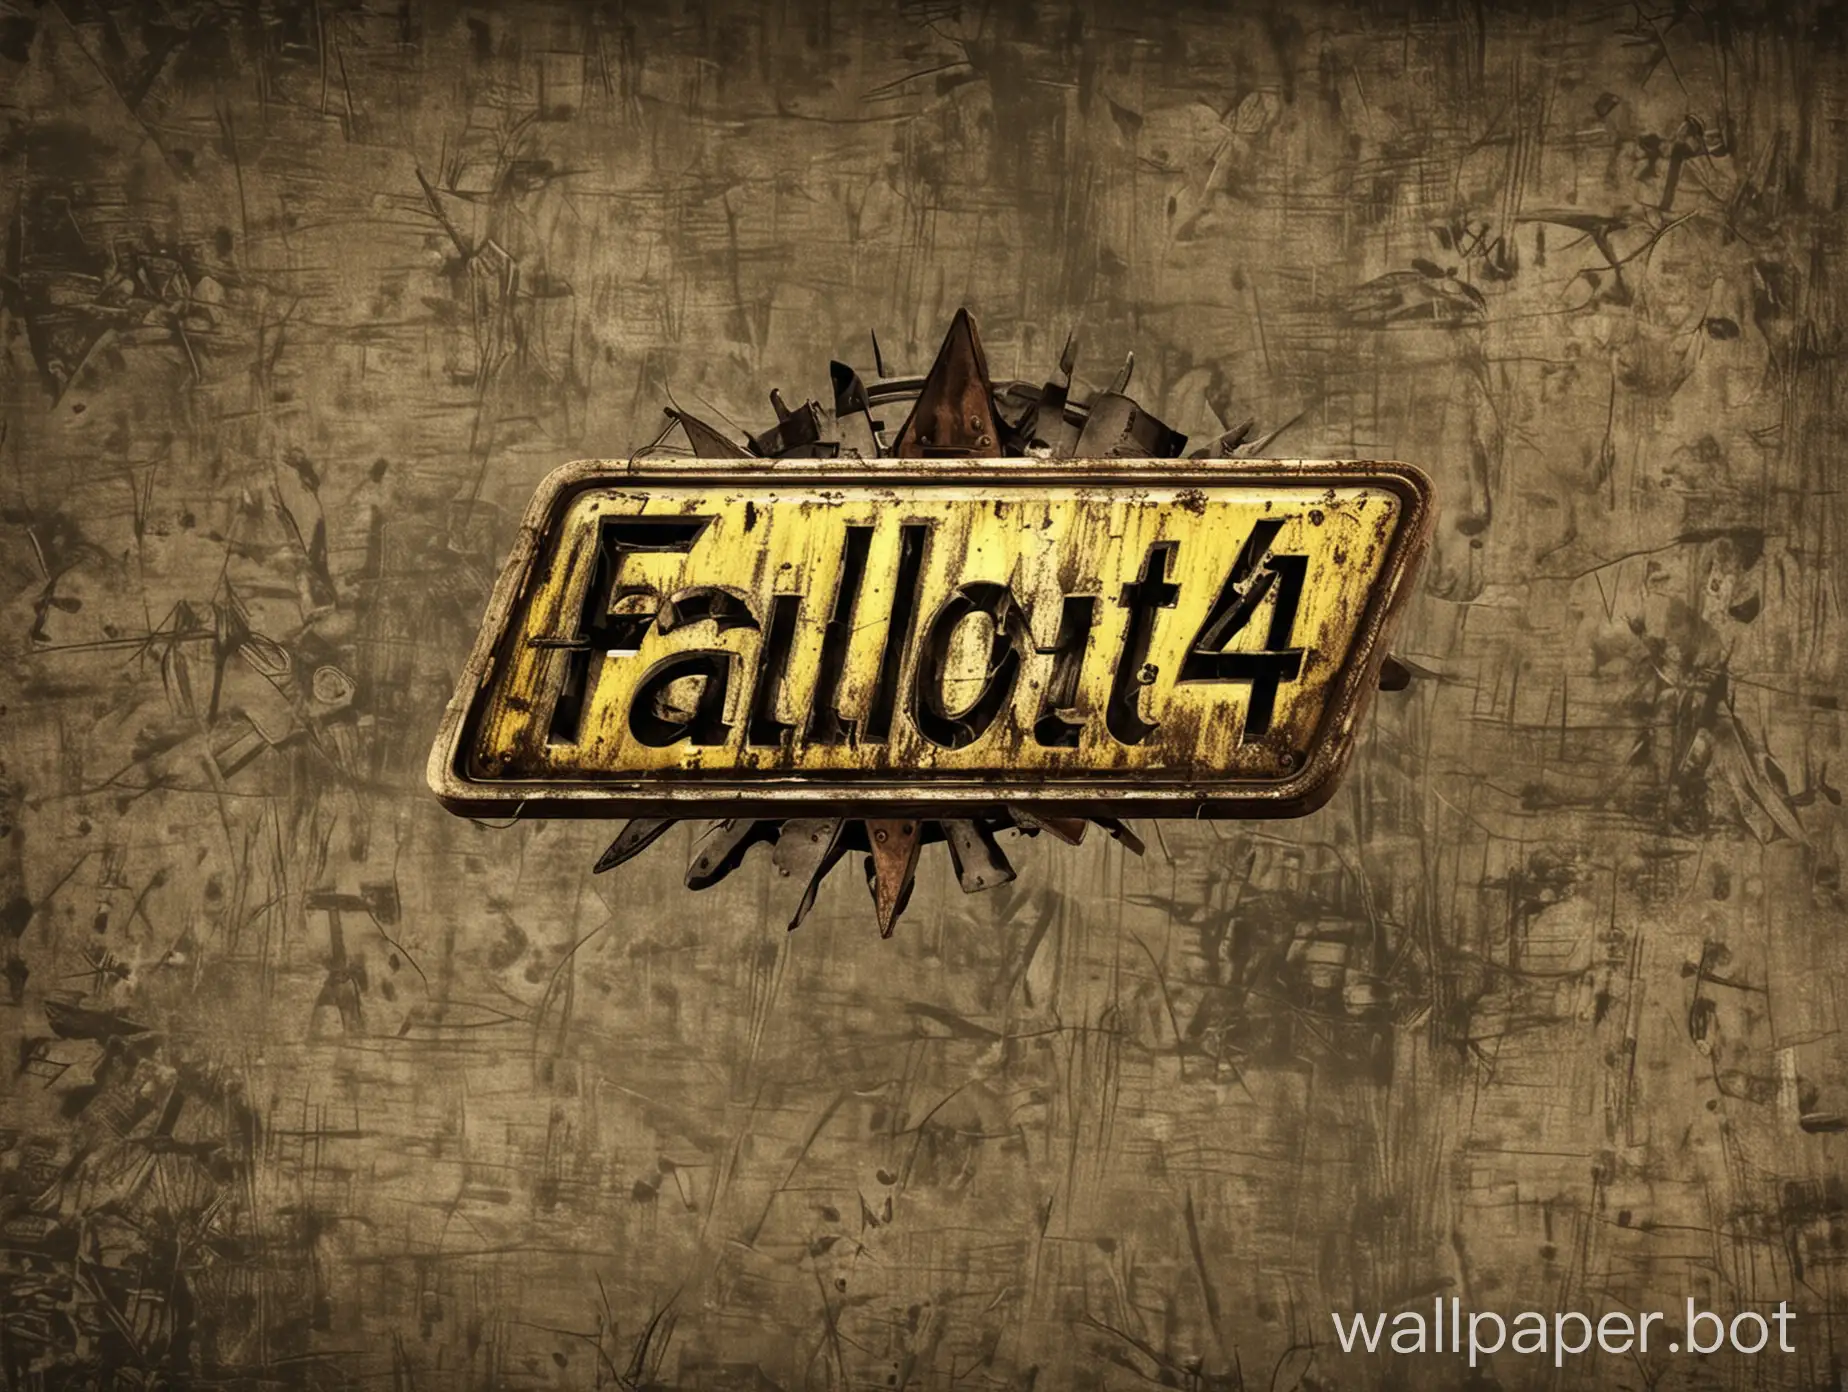 wallpaper from fallout 4 video game, 2560x1440 resolution